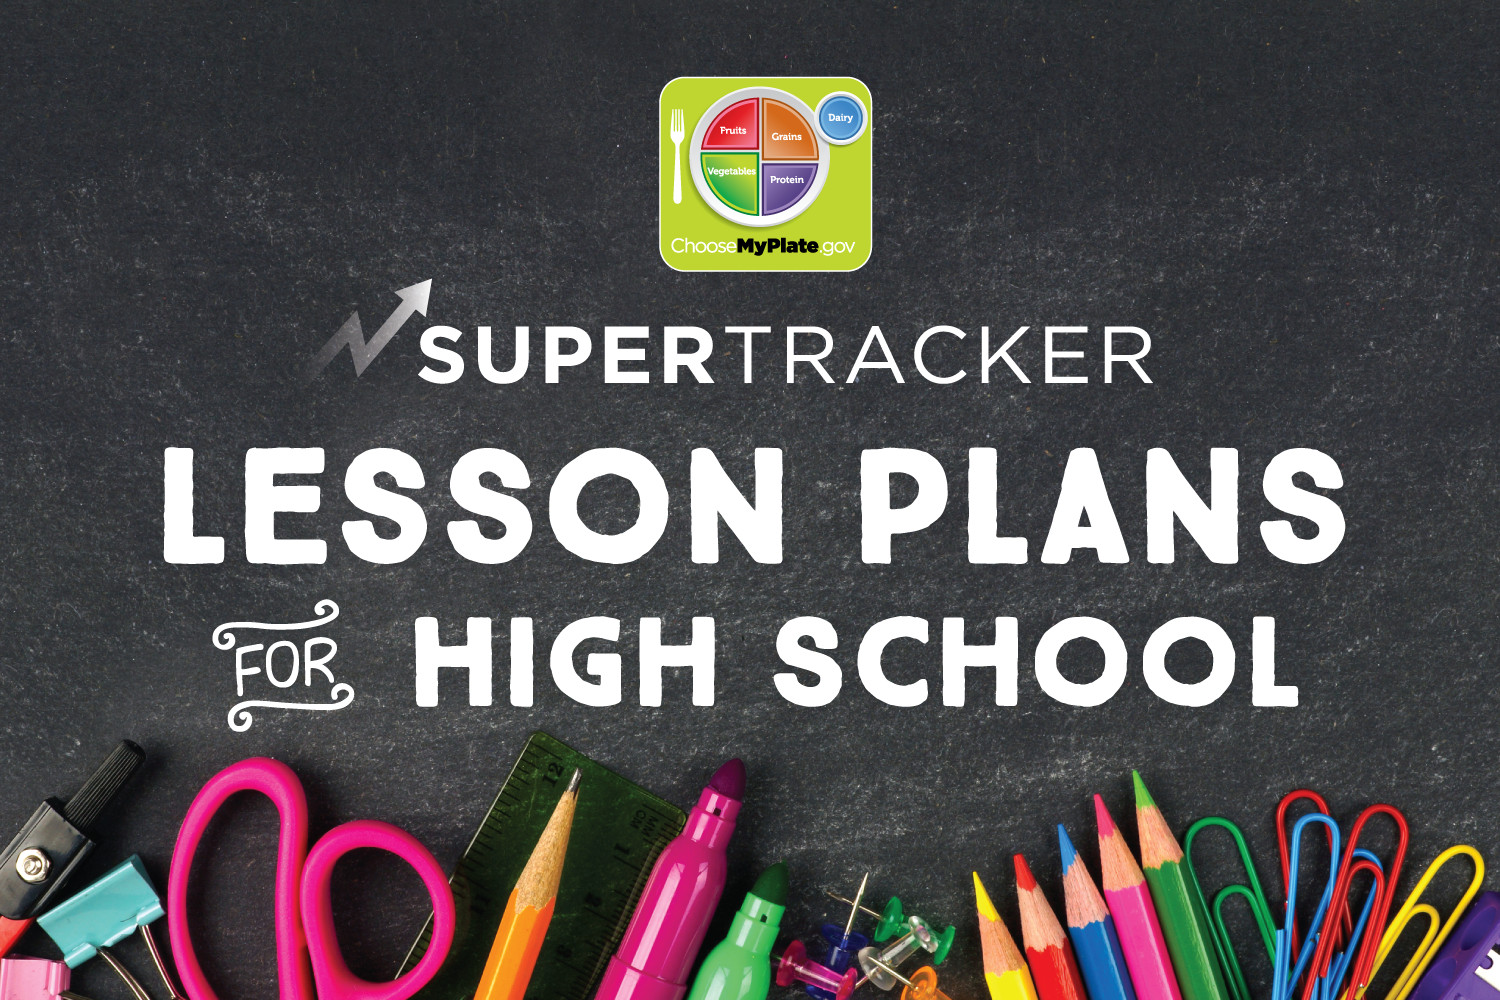 Nutrition Lesson Plans High School Lessonplans Teachers Printables Healthed Physed